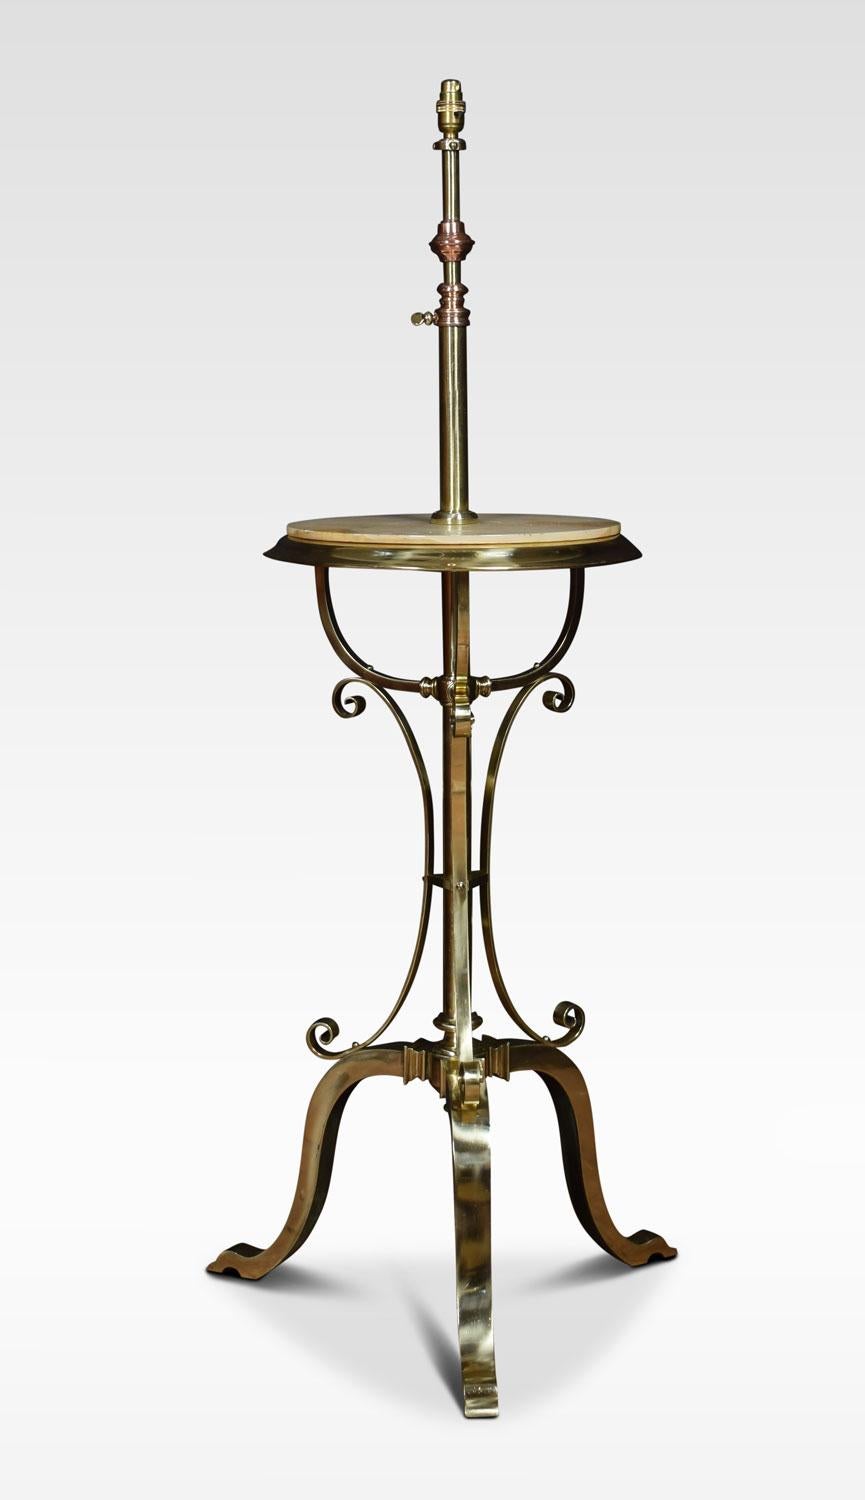 Brass and copper standard lamps the design attributed to W.A.S. Benson. With a central brass column and circular onyx shelf. All raised up on three square section scrolling legs, applied with strap work.
Dimensions:
Height 52 inches adjustable to